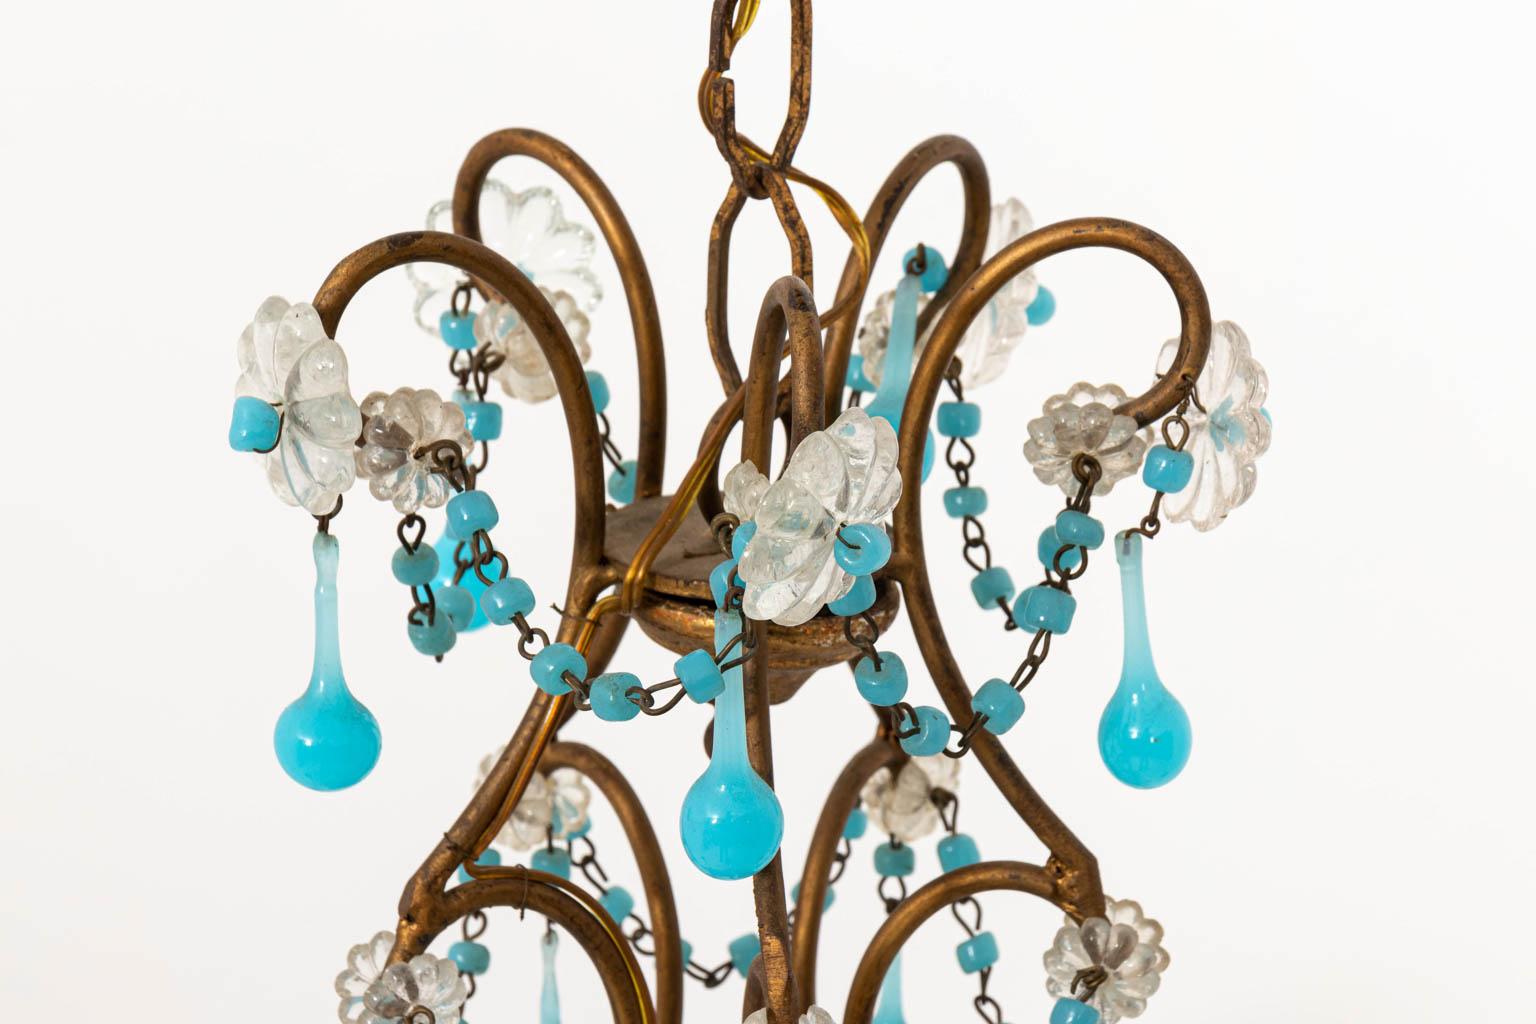 Five-arm unelectrified petite blue and clear crystal chandelier in a gilt finish circa 1970s. Made in France. Please note of wear consistent with age including minor losses. Shades not included.